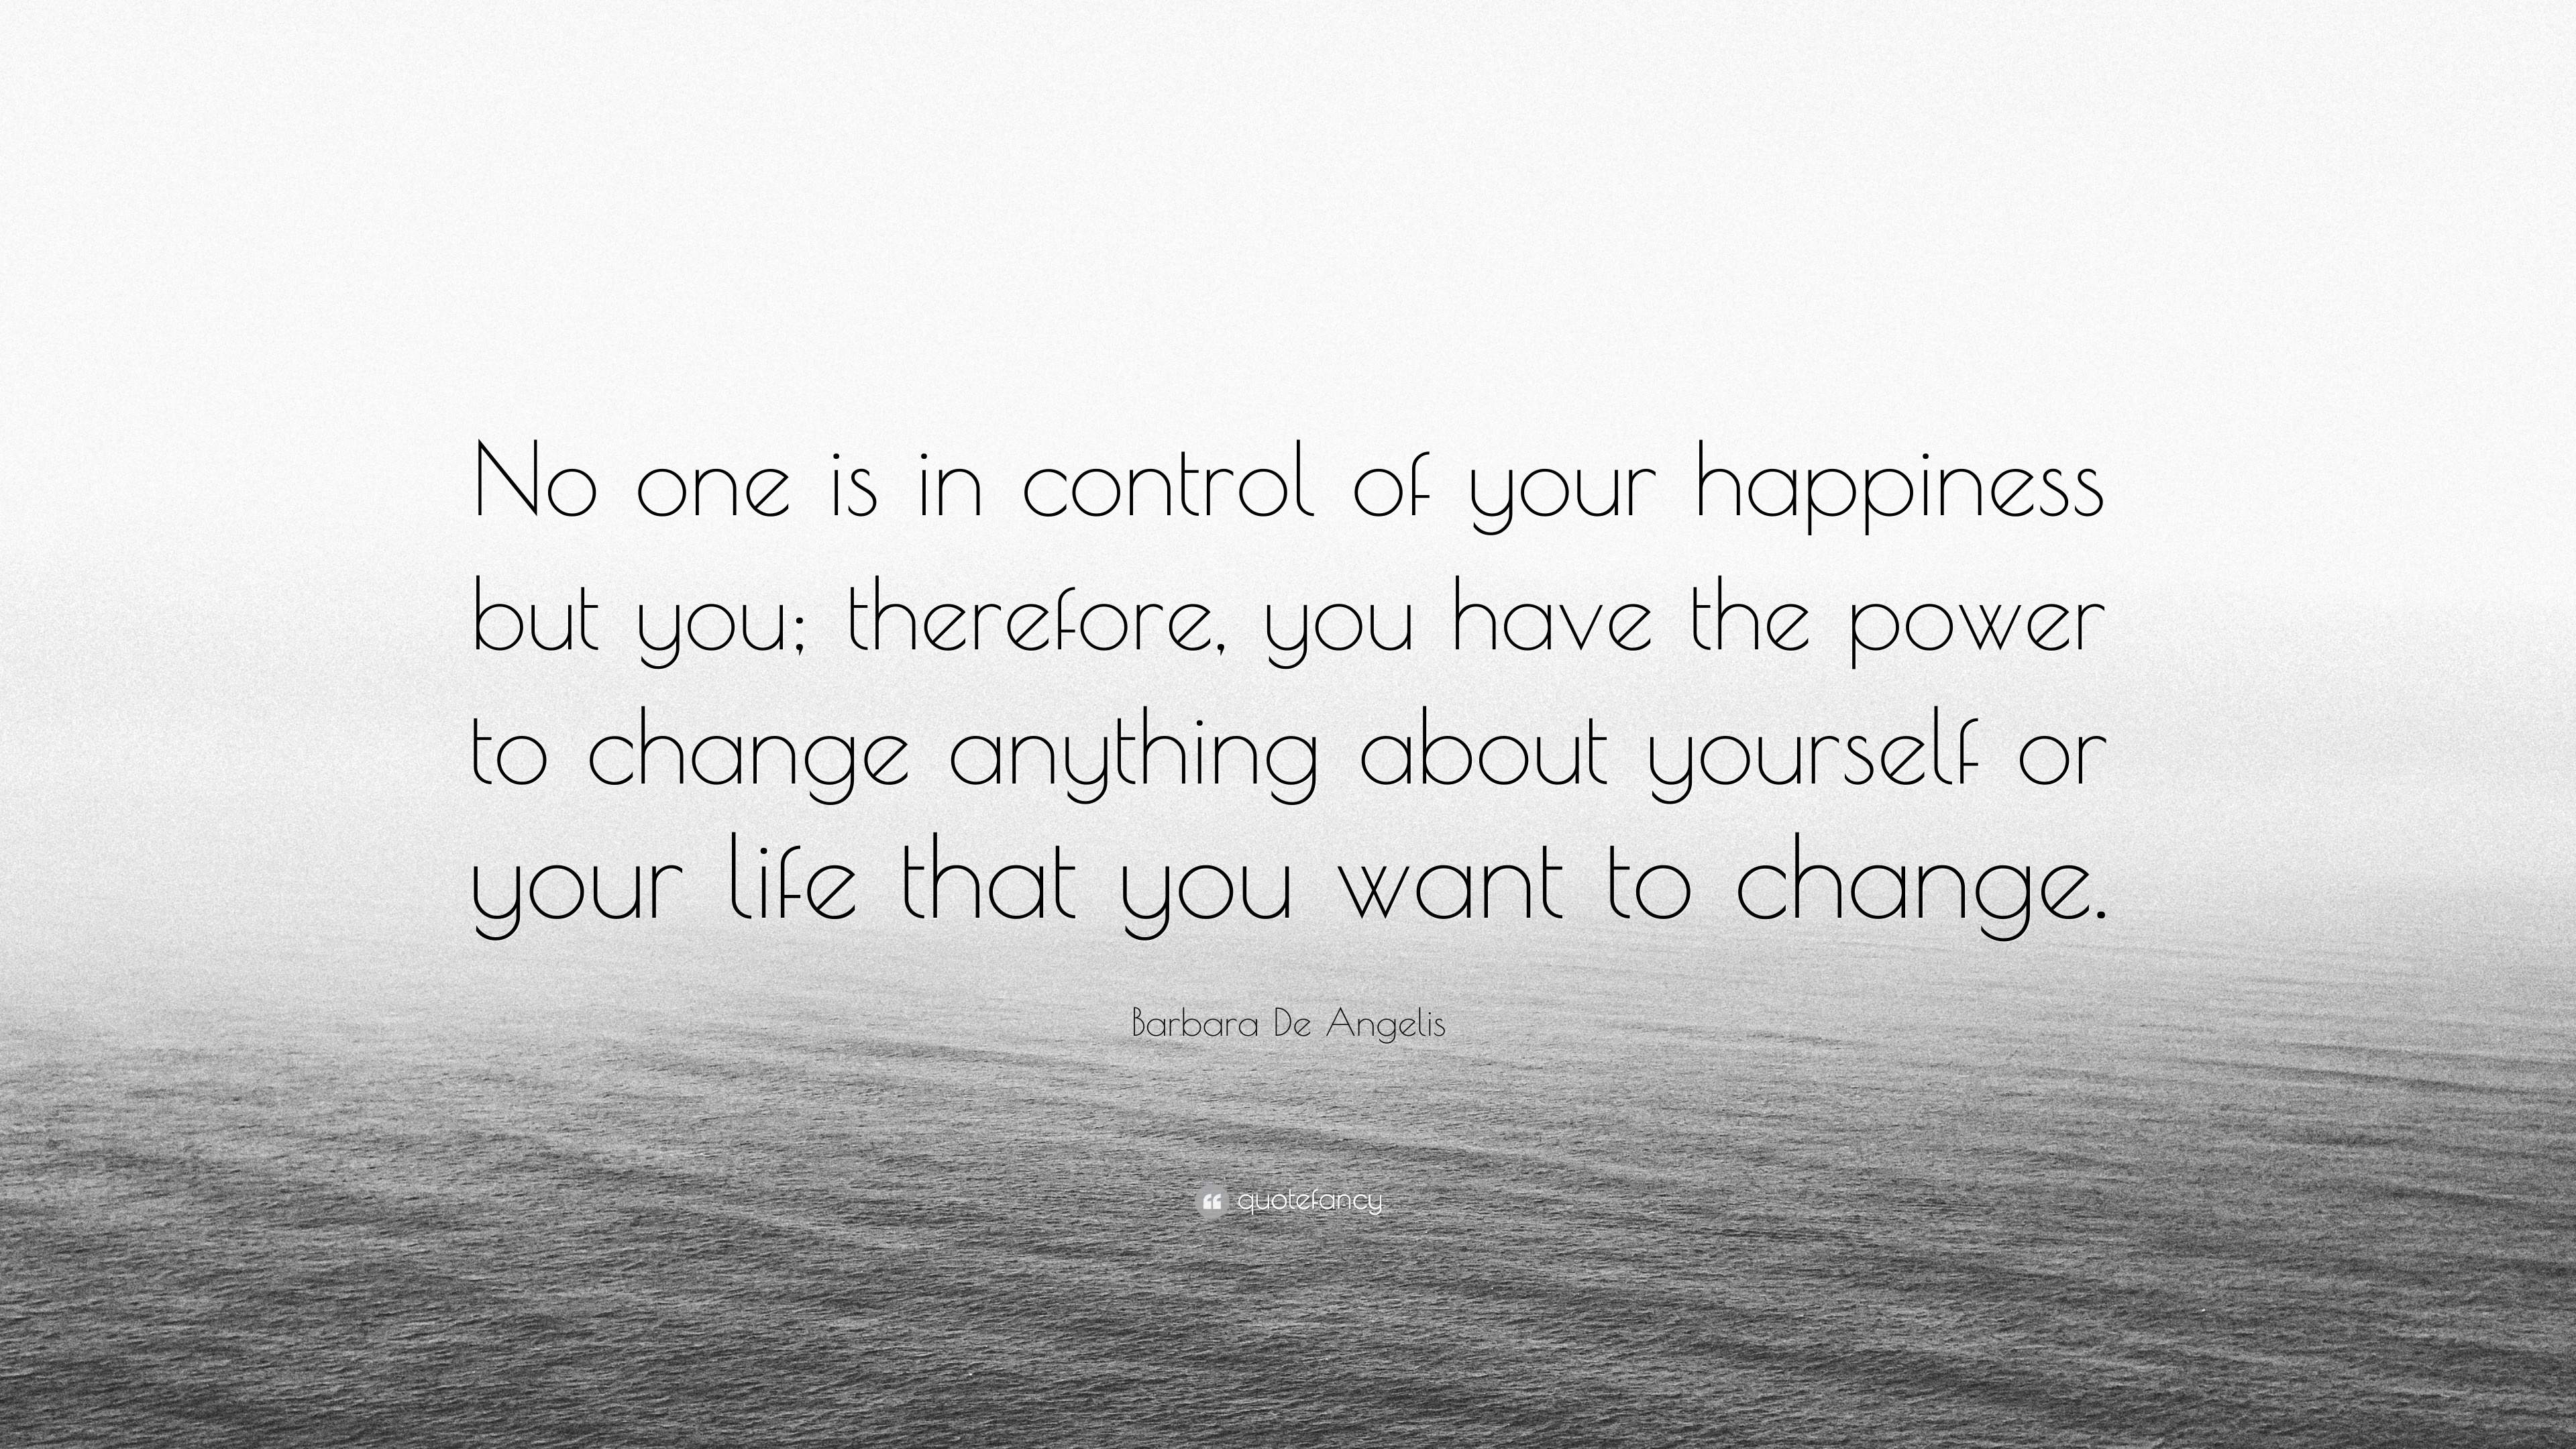 Barbara De Angelis Quote “No one is in control of your happiness but you